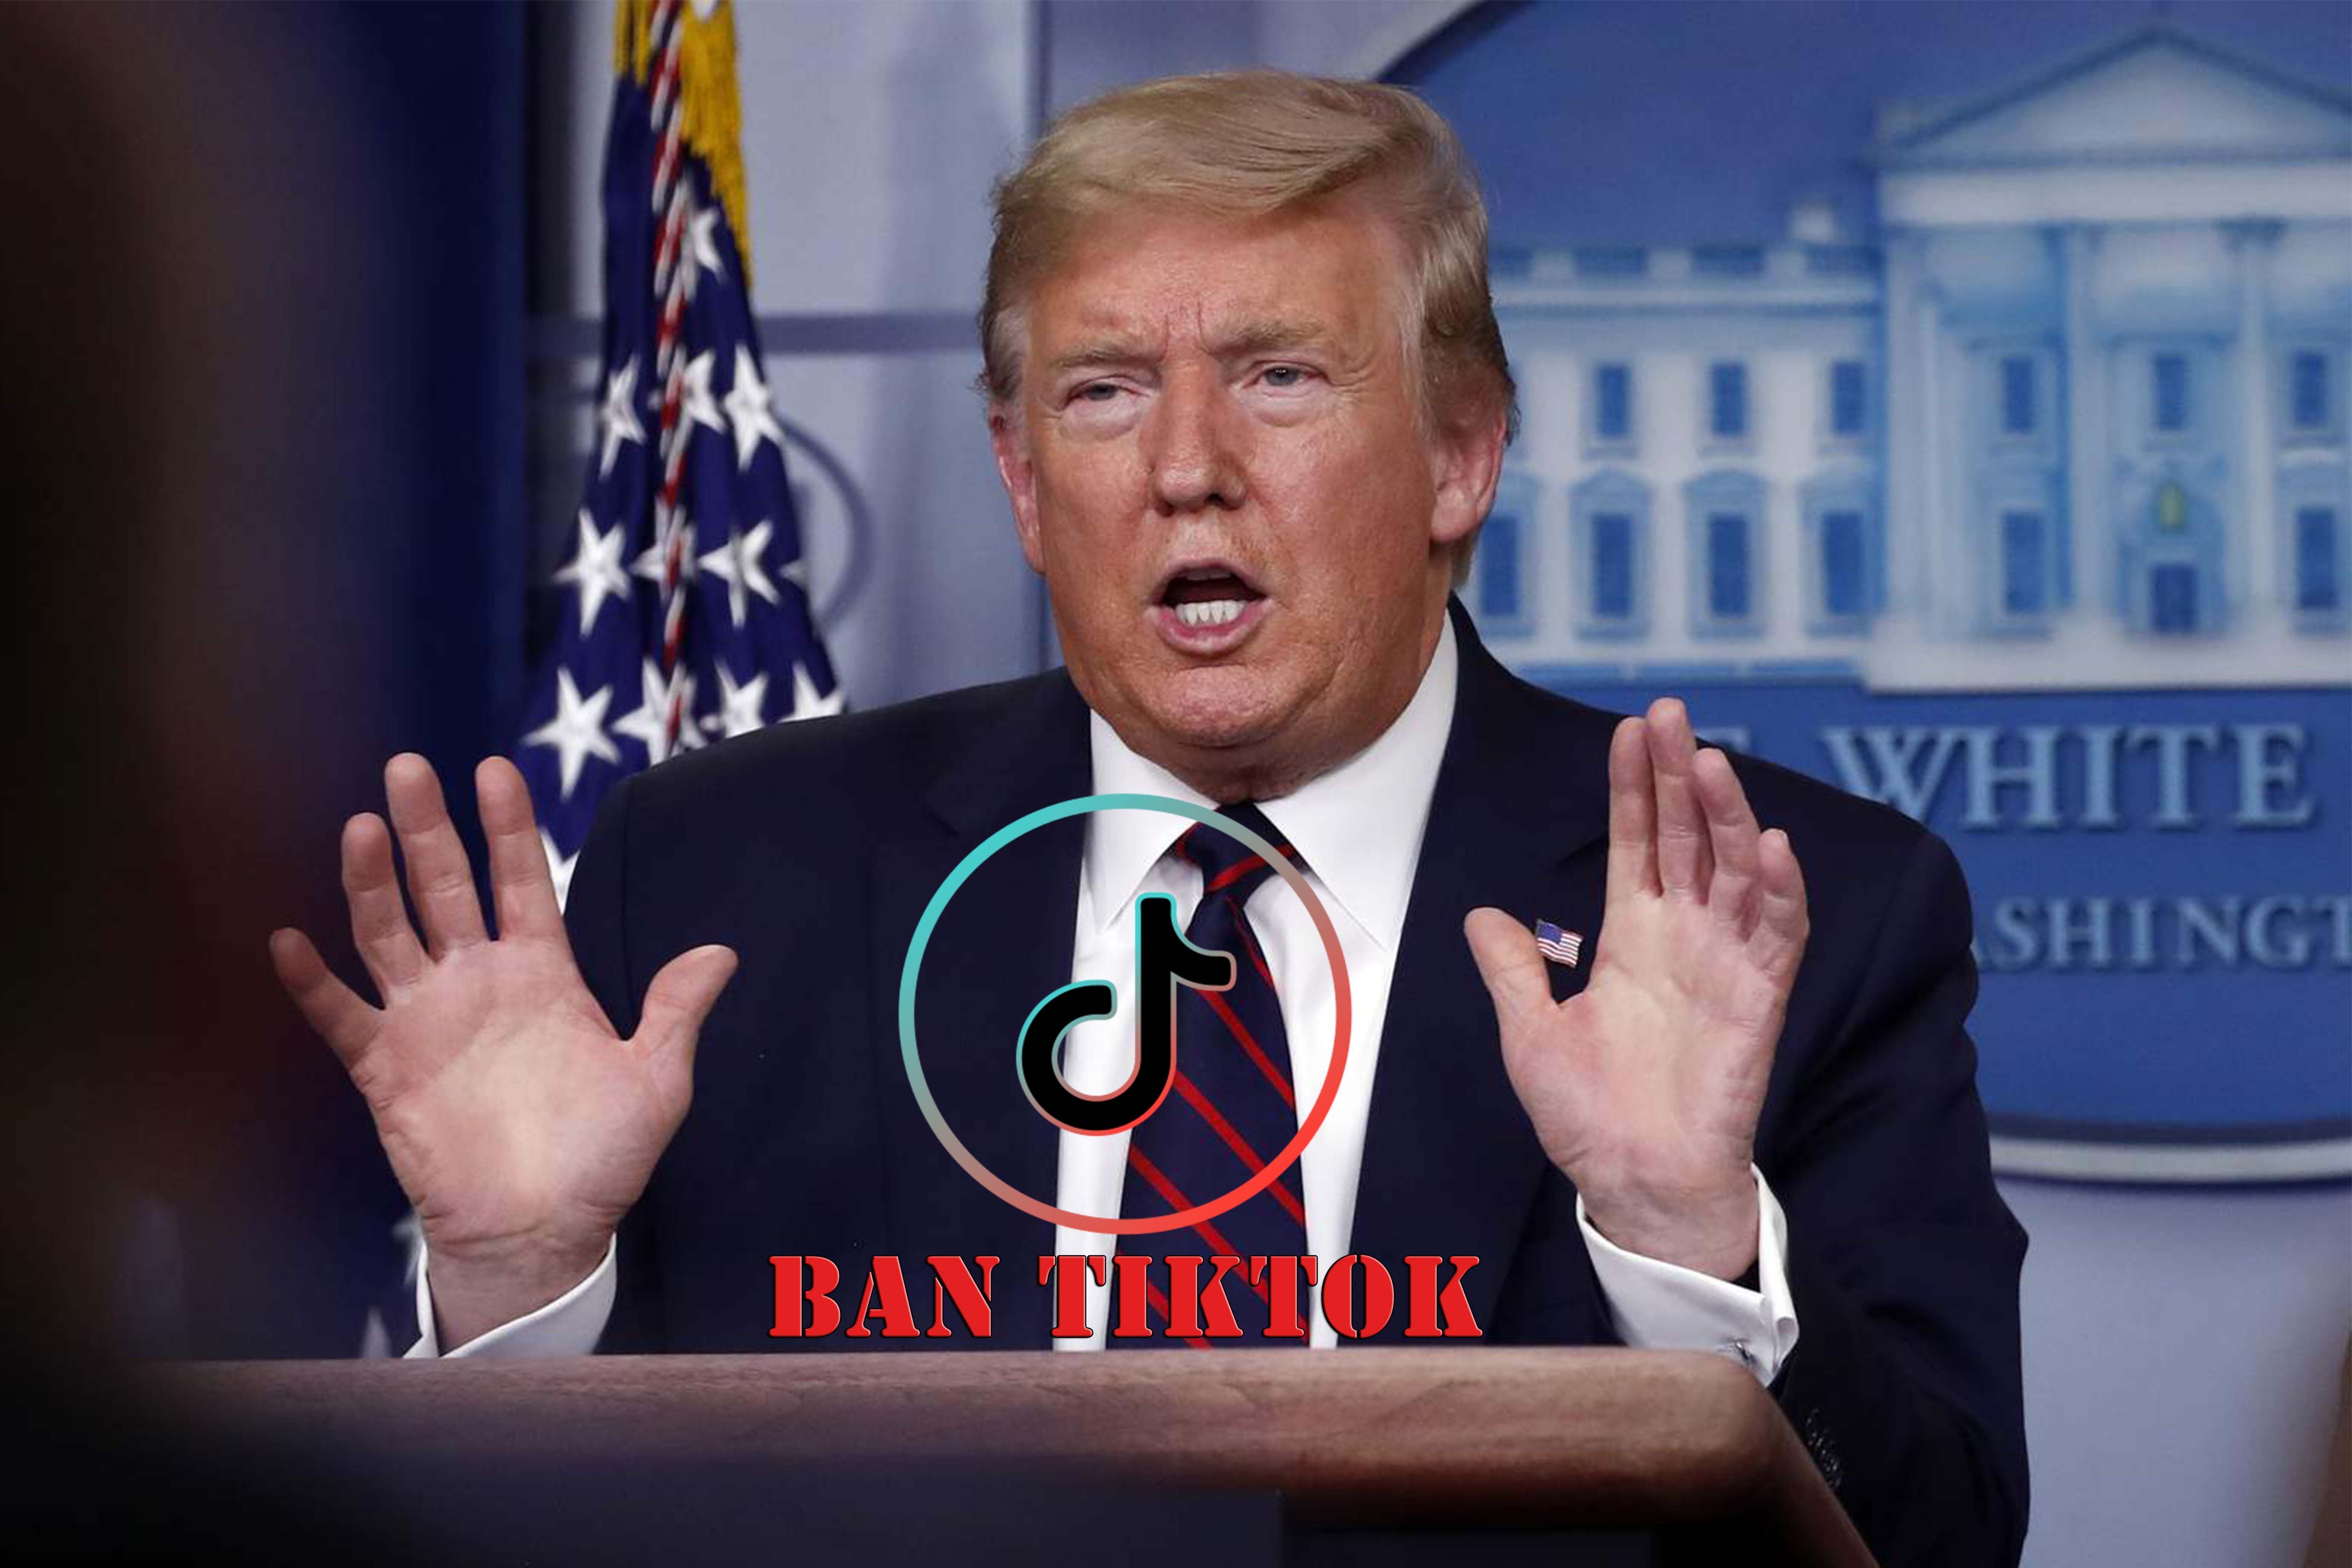 White House official said: TikTok could operate as American company, better solution than banning